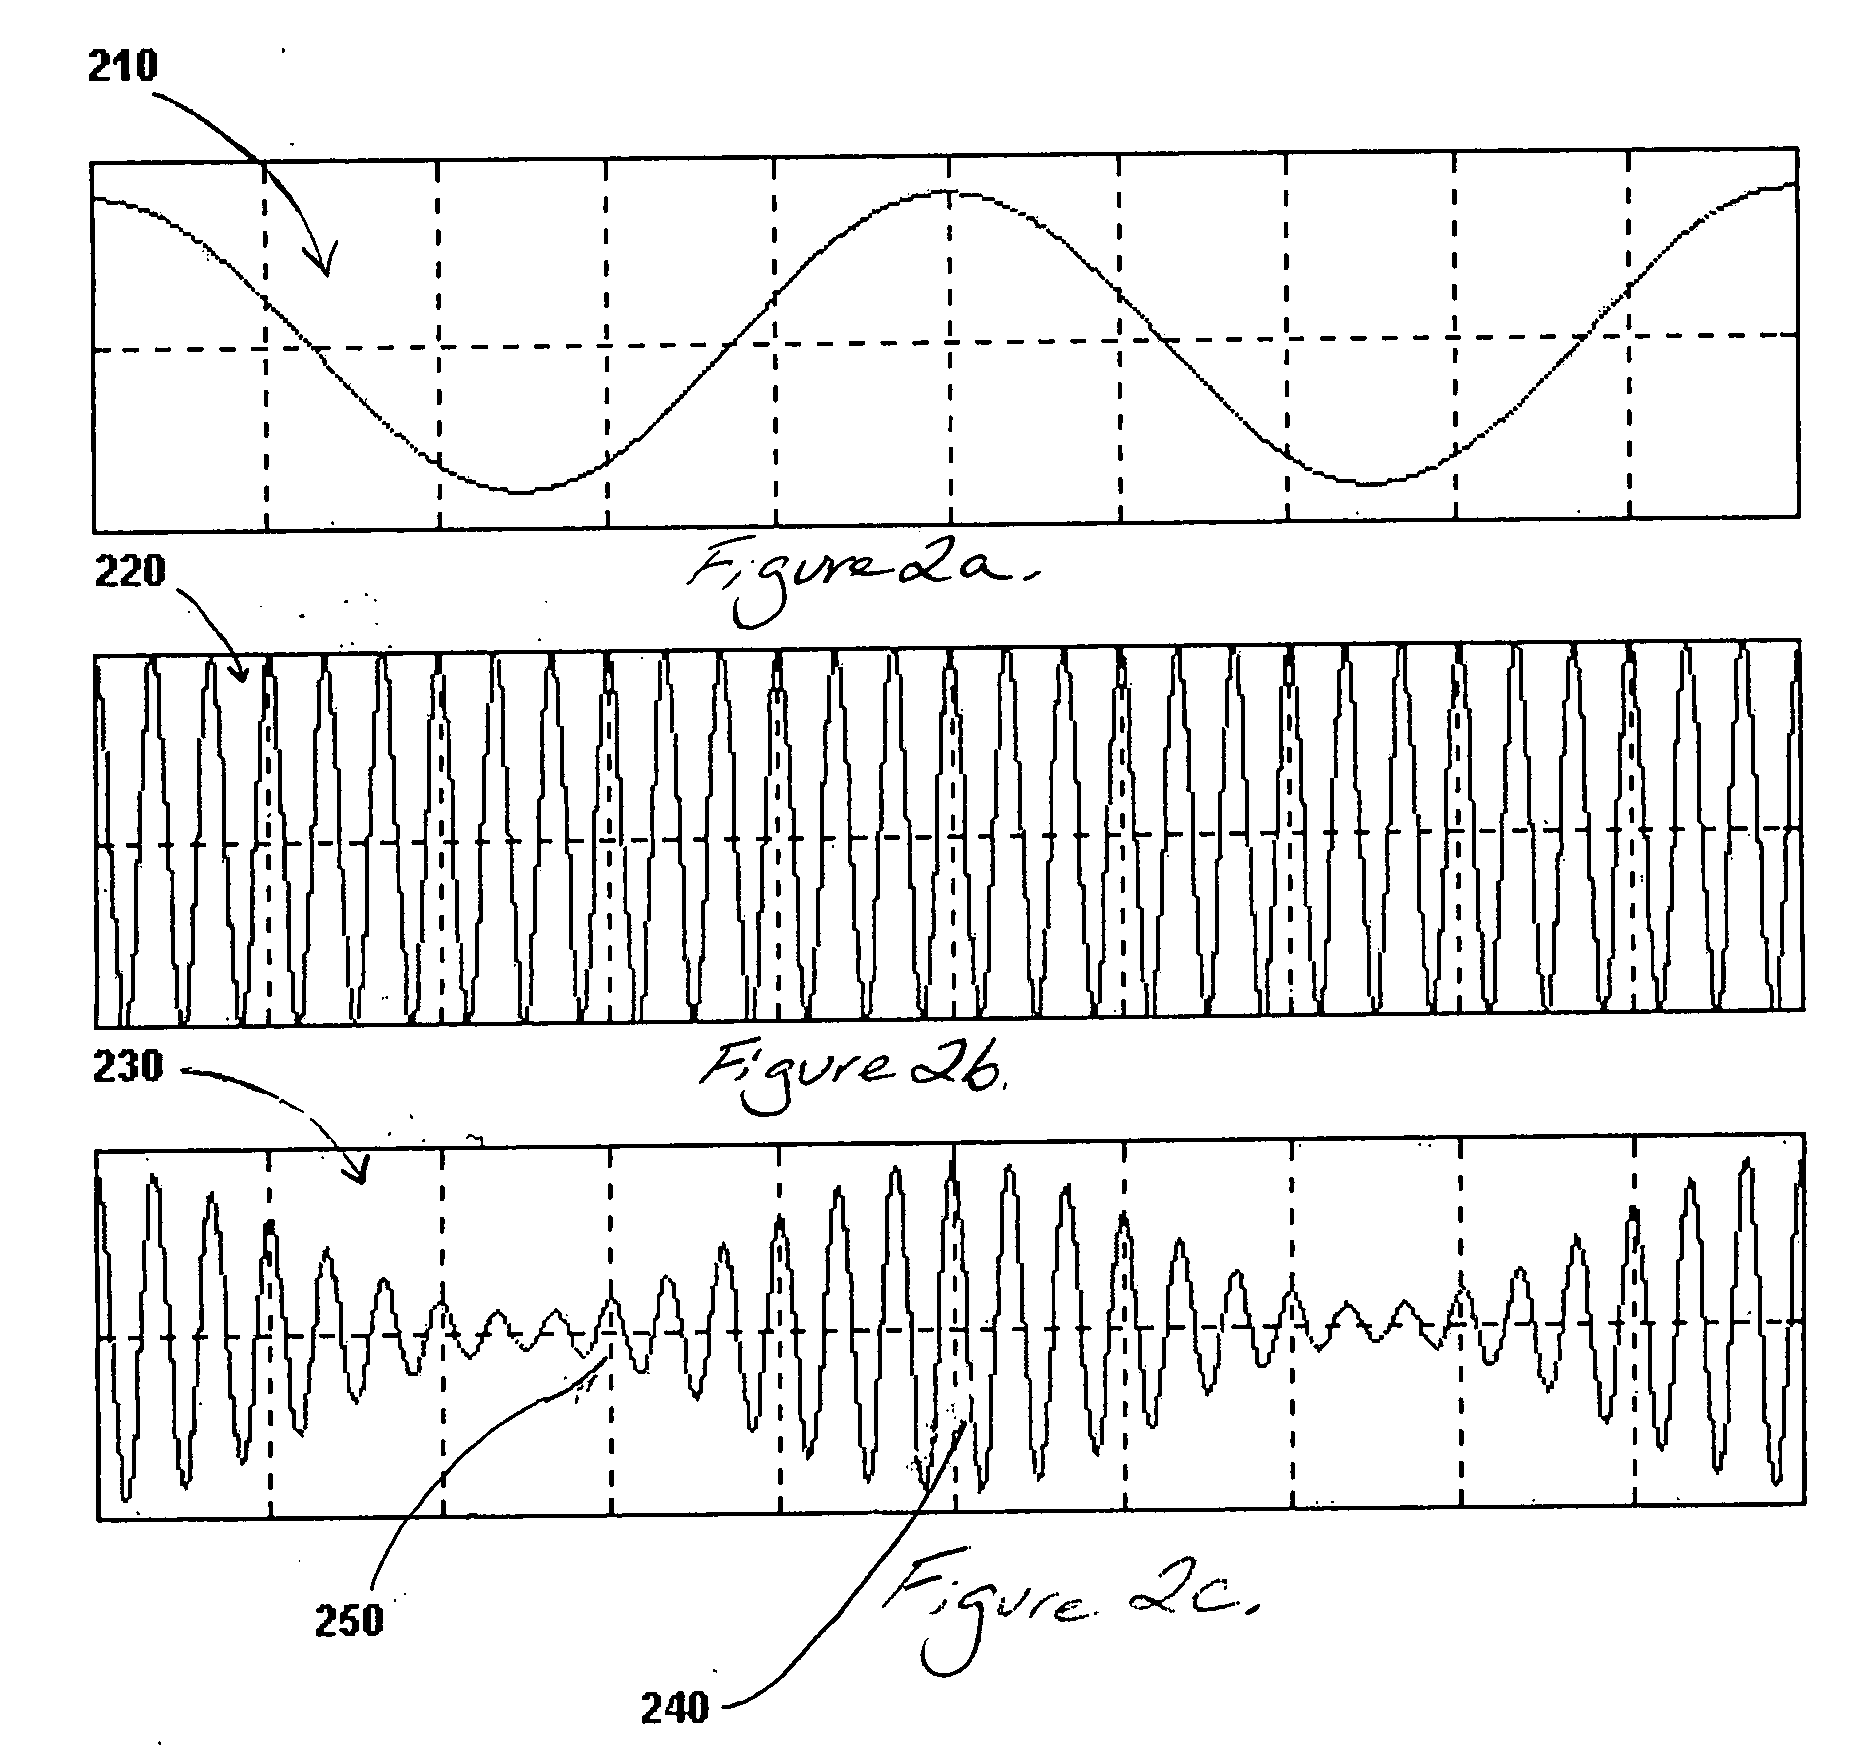 System and method of generating electrical stimulation waveforms as a therapeutic modality